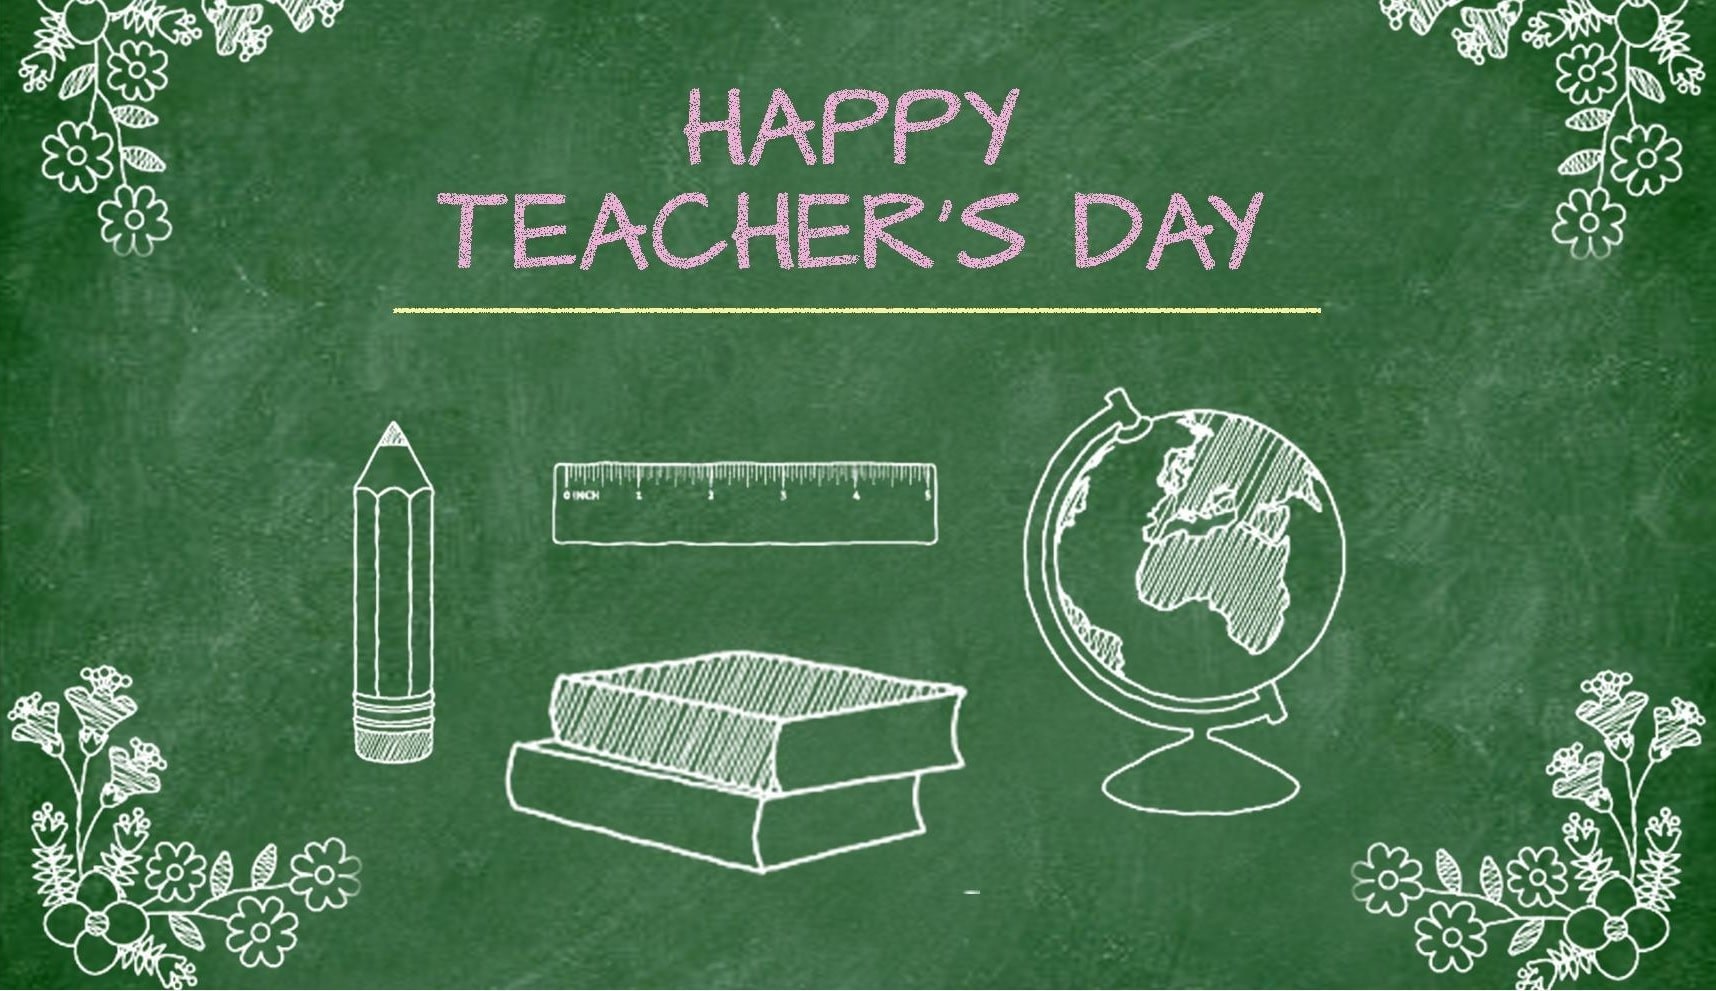 <p>Reporter Post wish you all a Happy Teachers Day</p>
